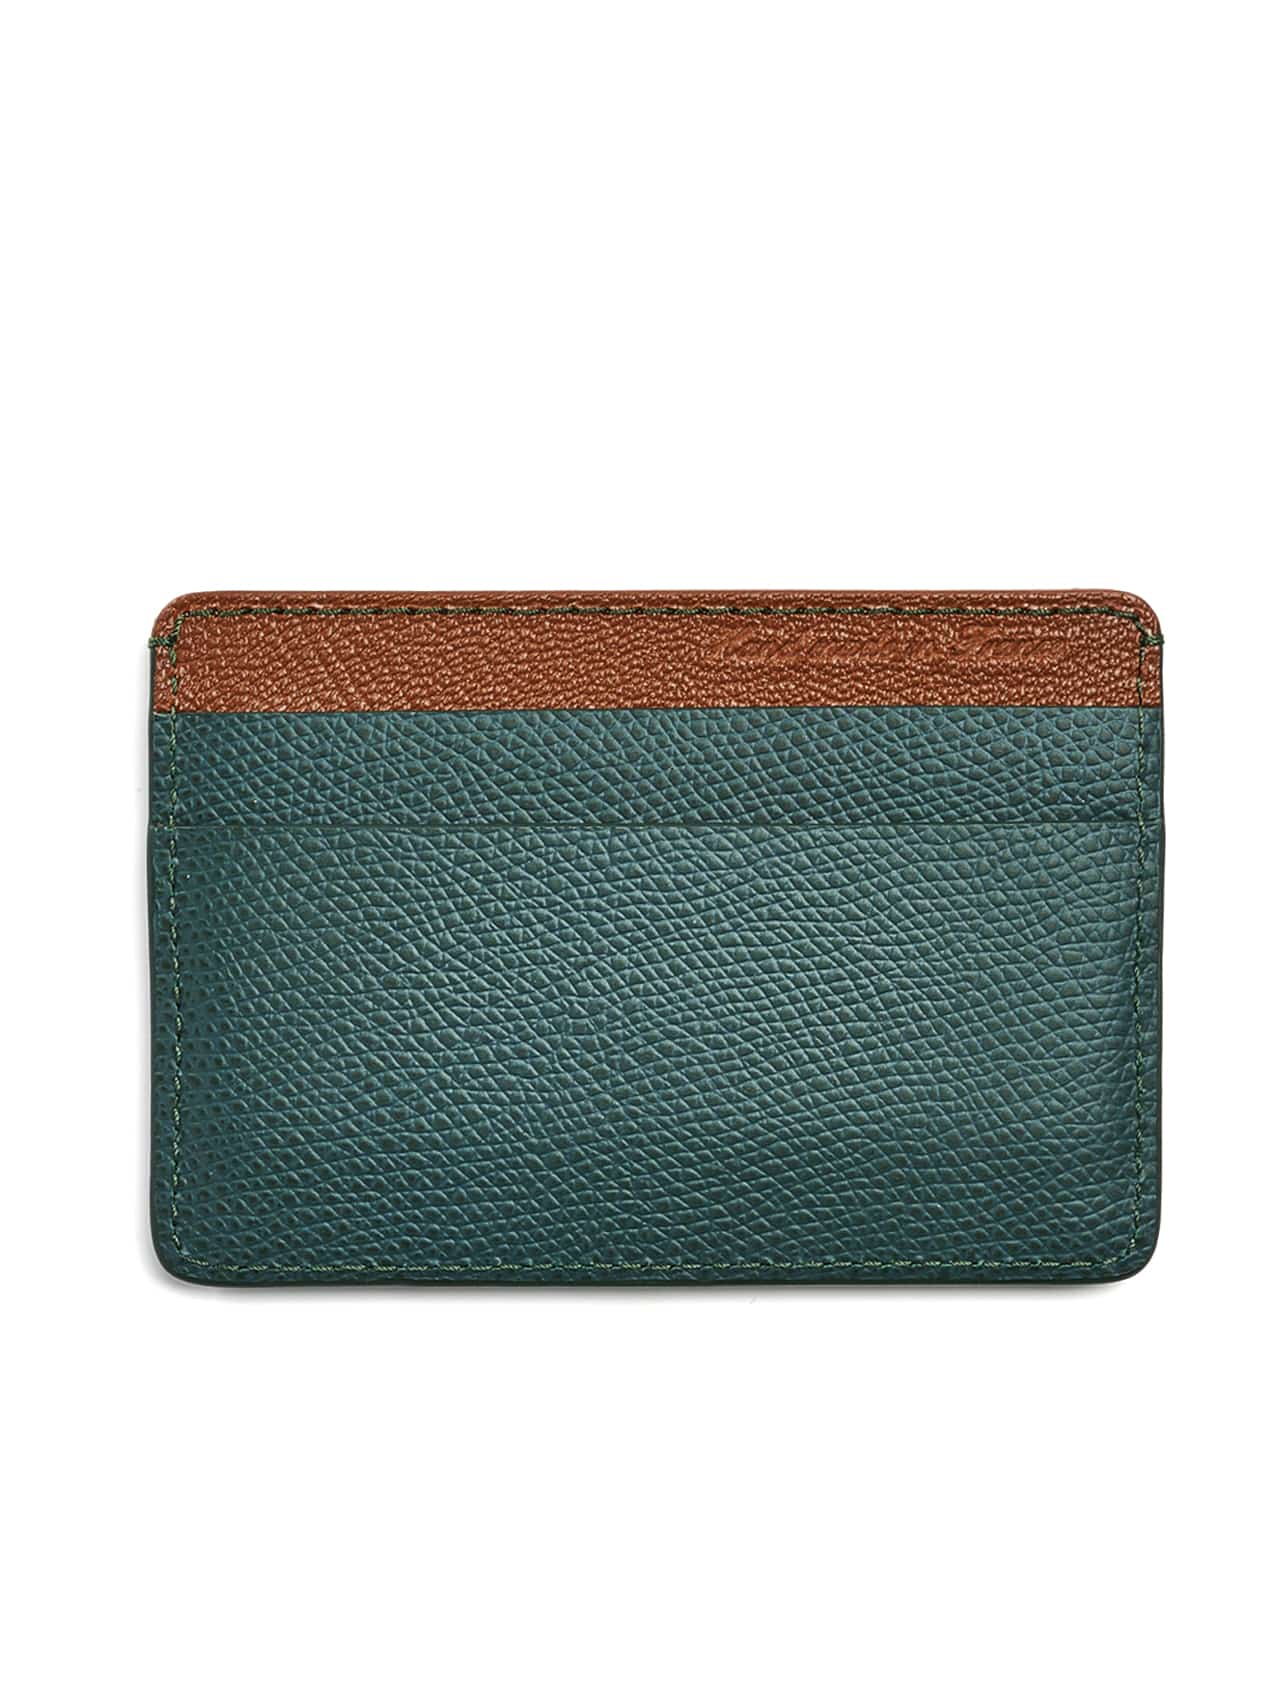 slim card holder leather brown green leather